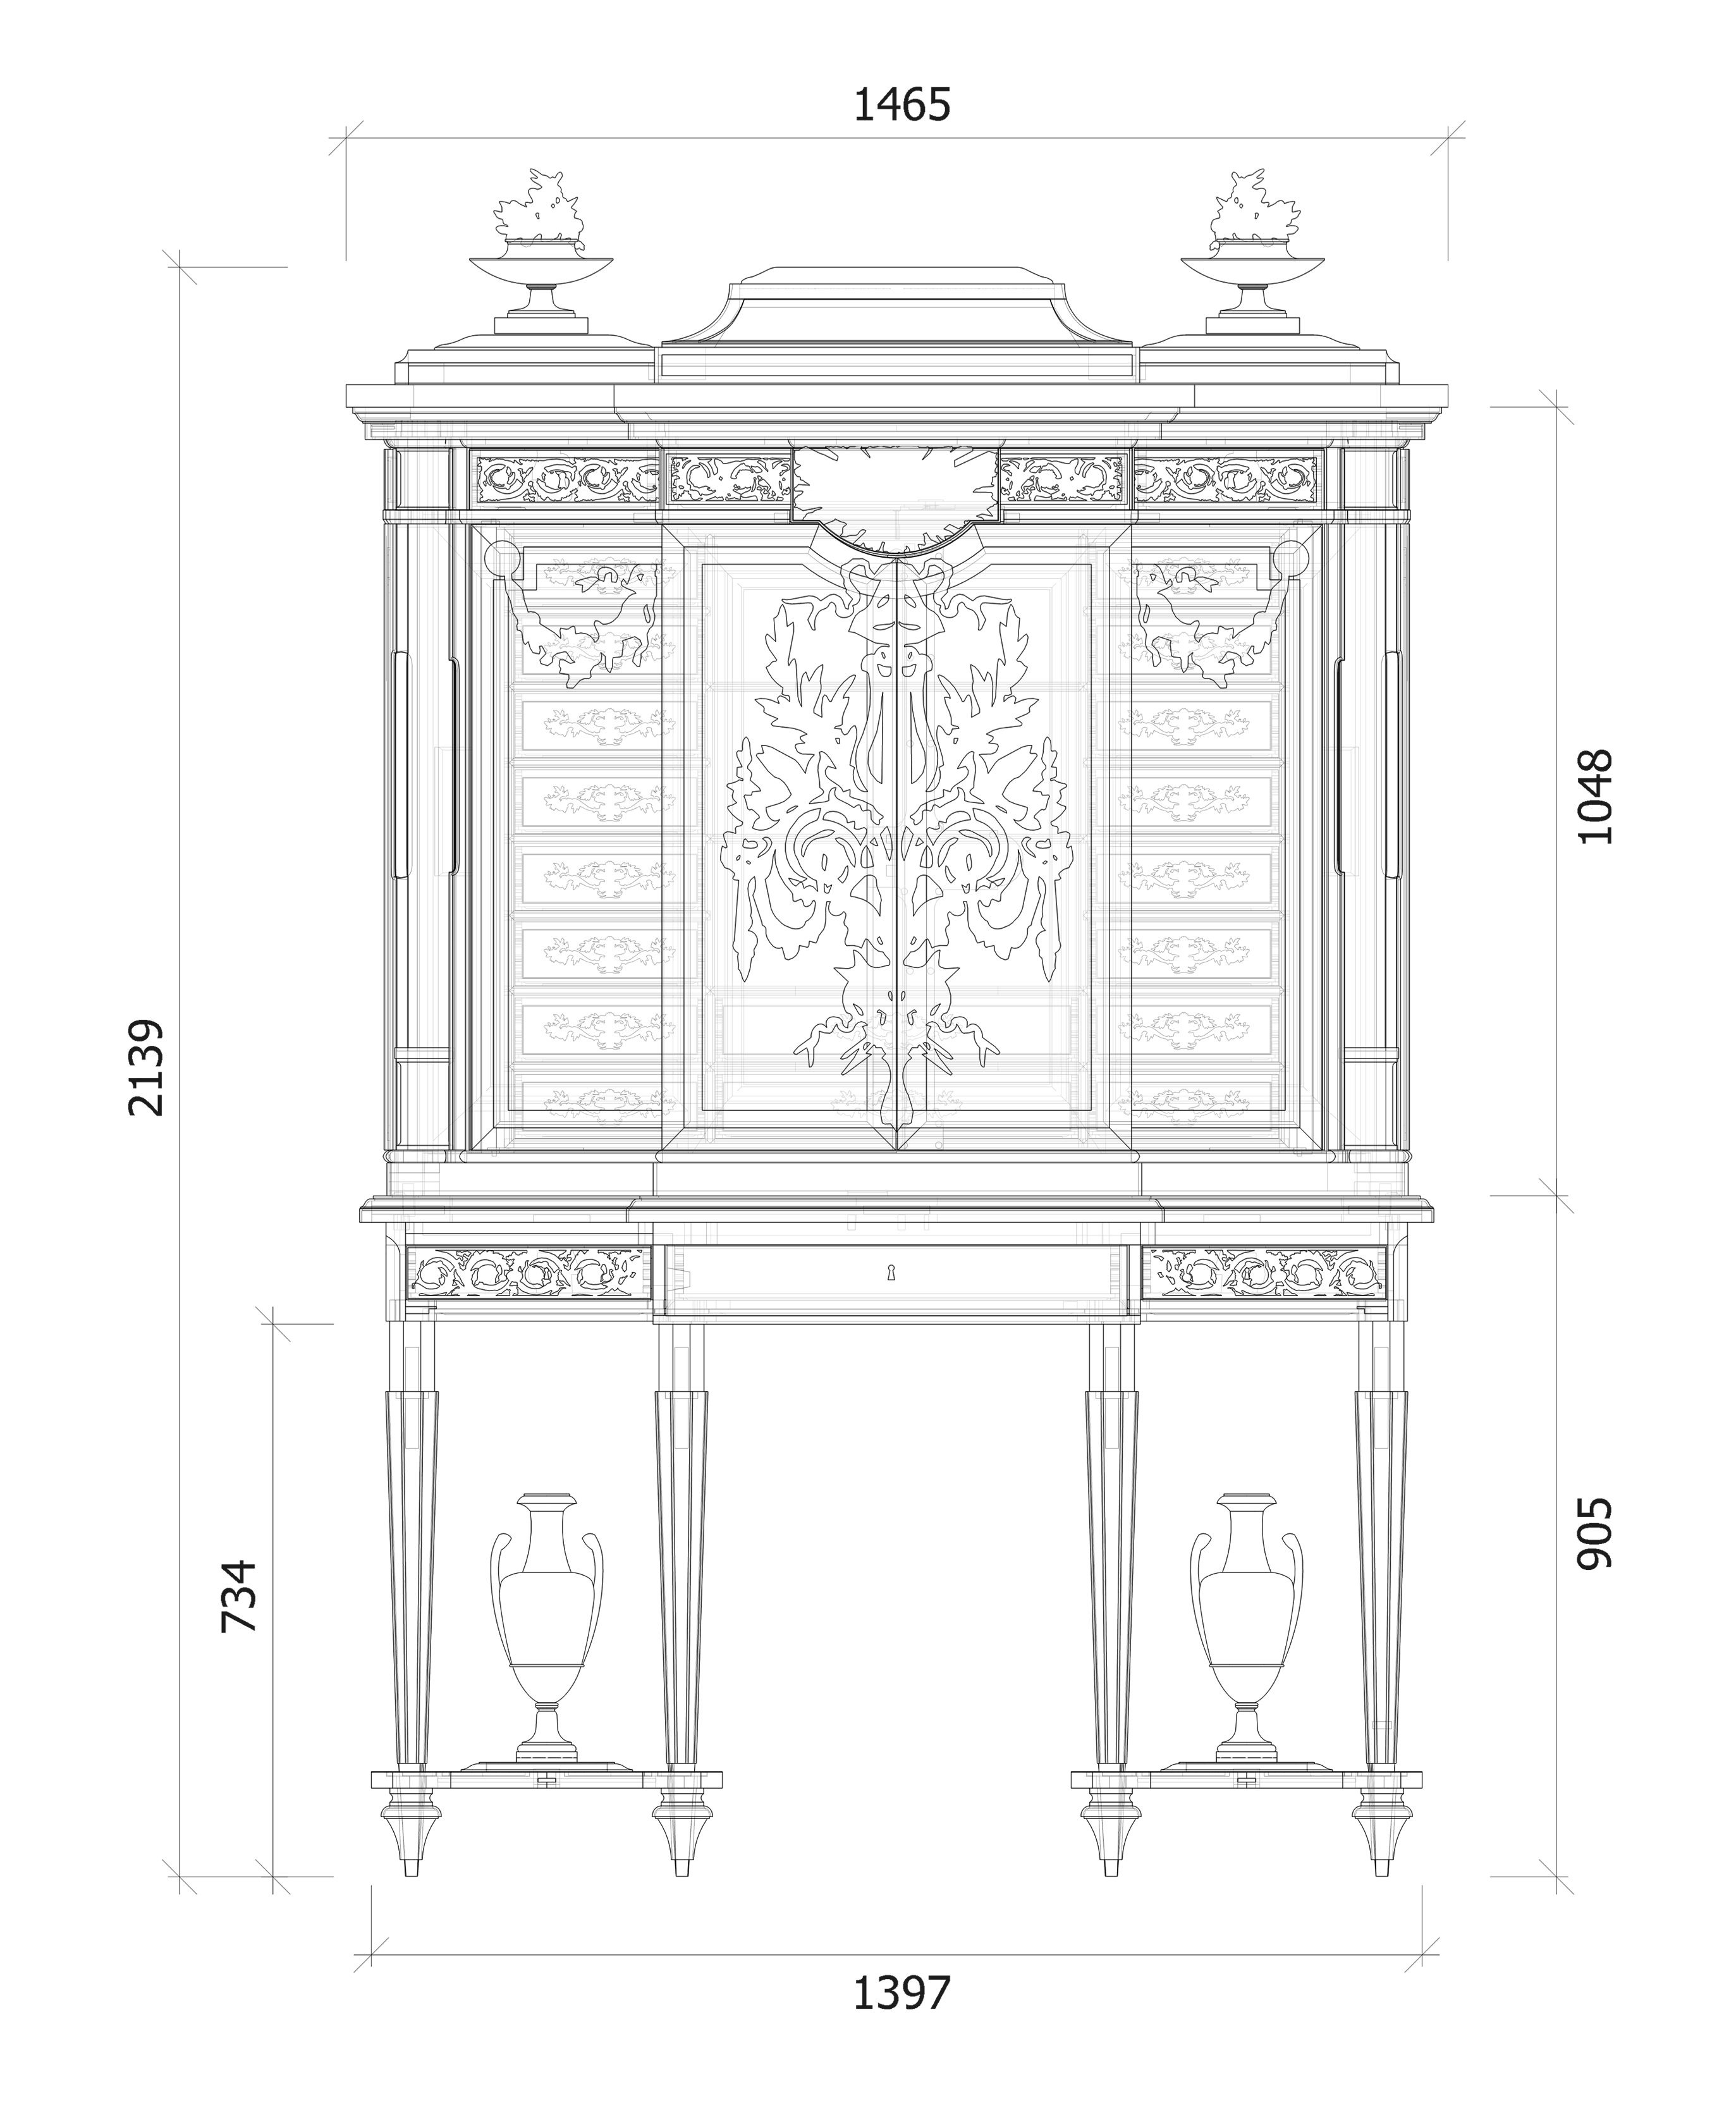 Drawing of front of jewel cabinet with measurements